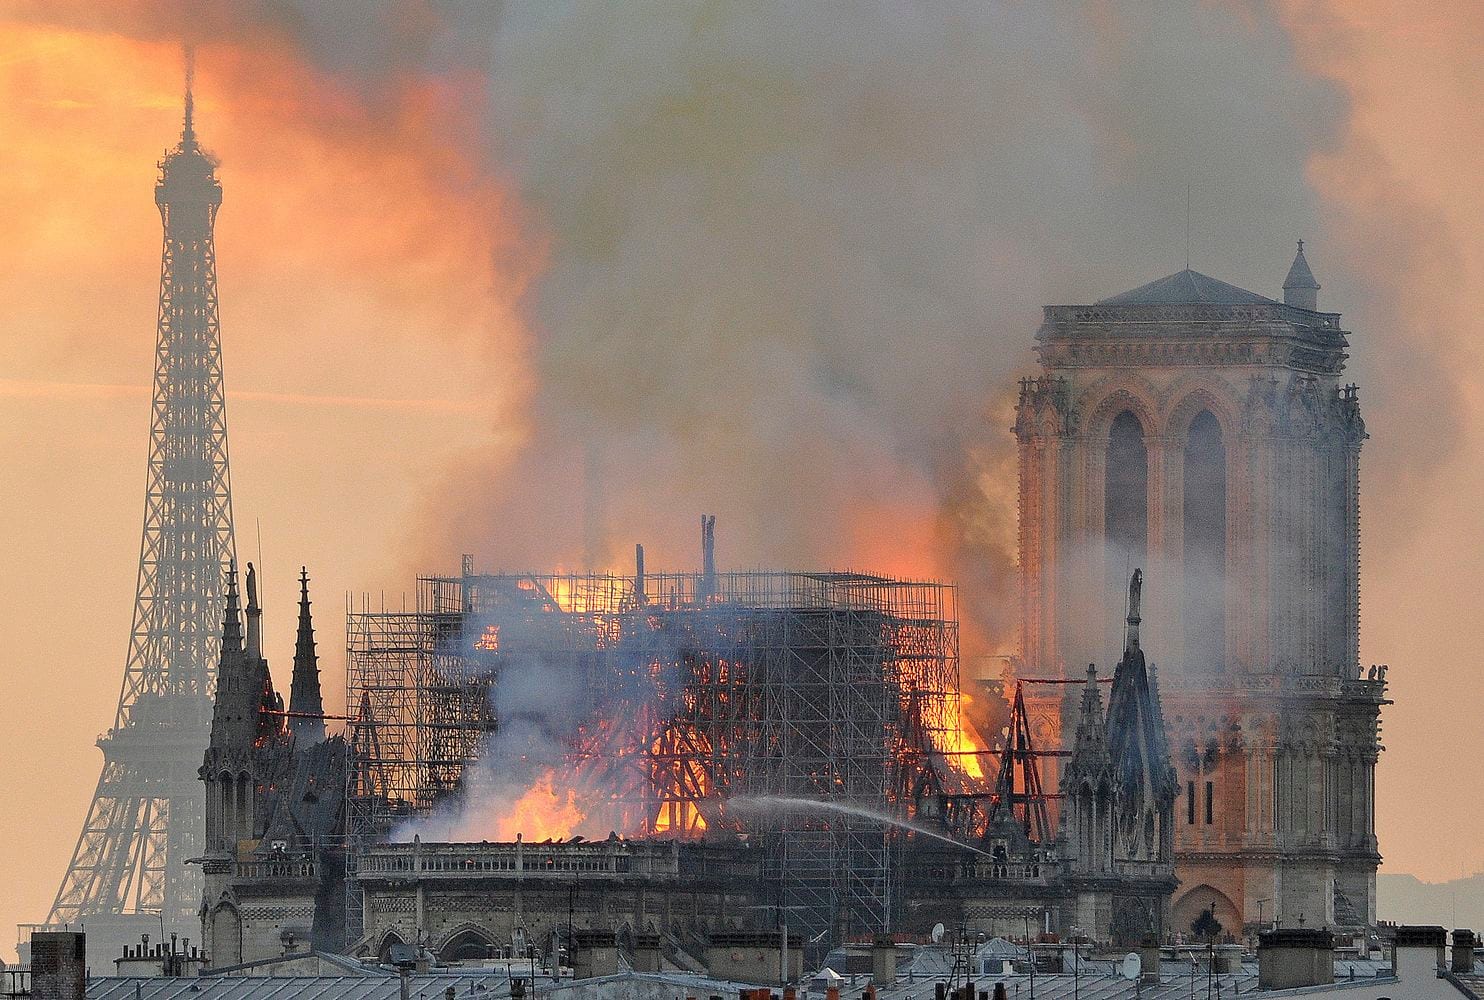 Notre Dame Cathedral of Paris blazes up in the fire